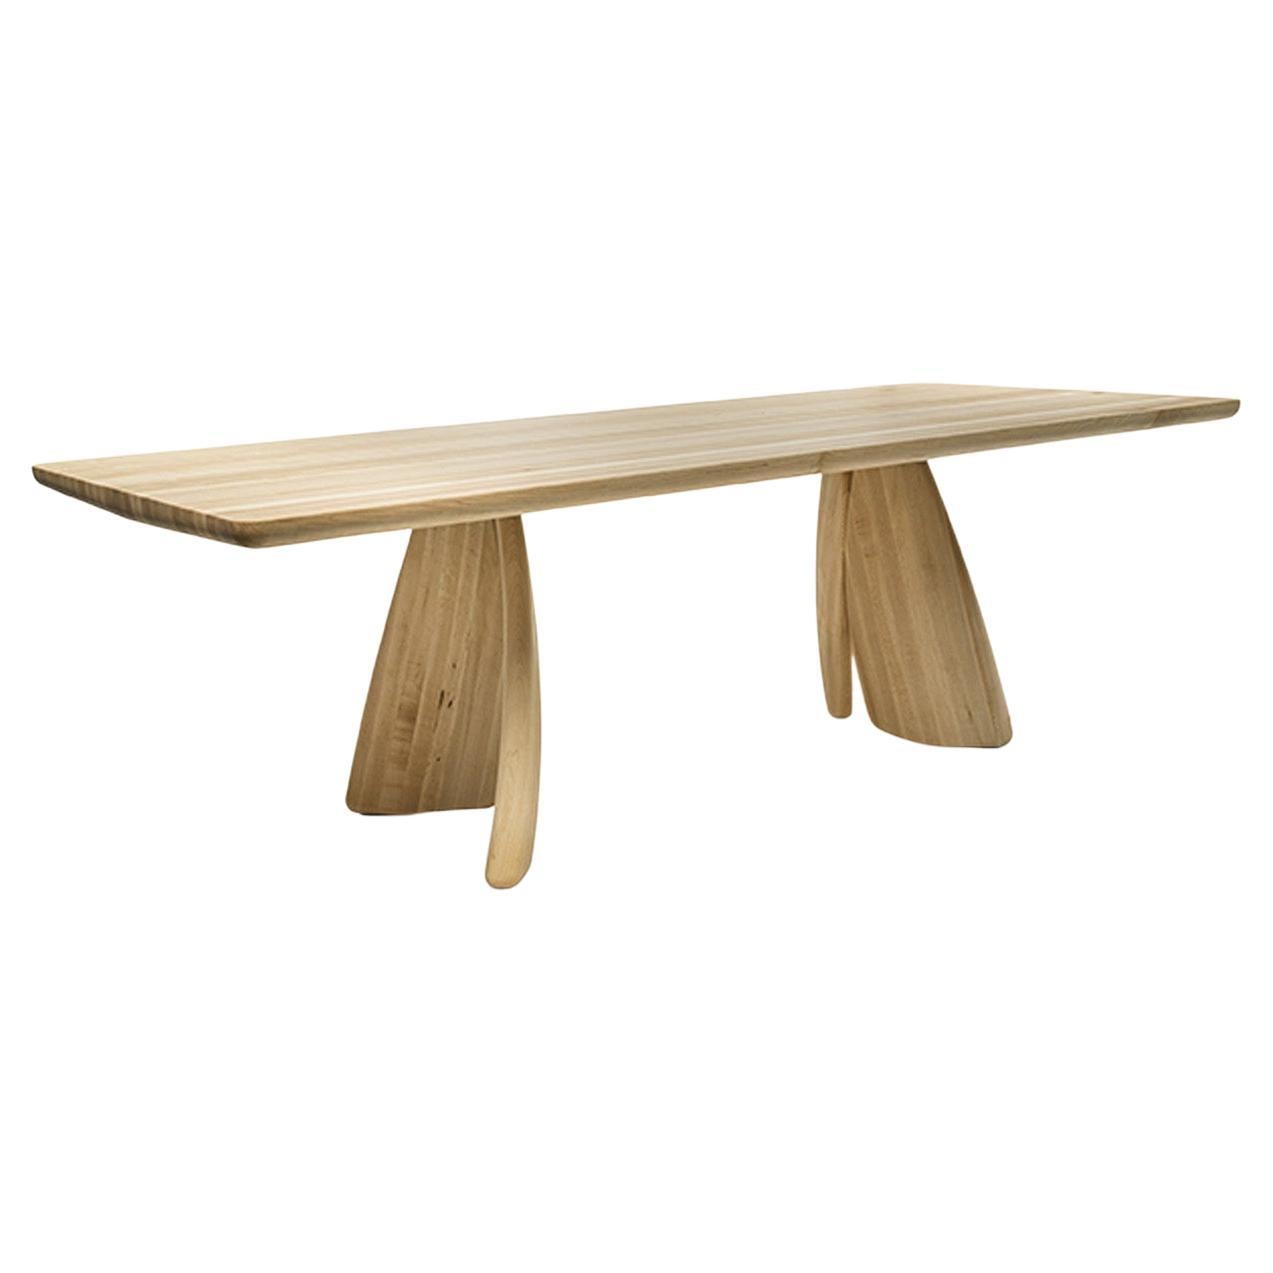 Alter Ego Solid Wood Dining Table, Designed by Ilenia Viscardi, Made in Italy 